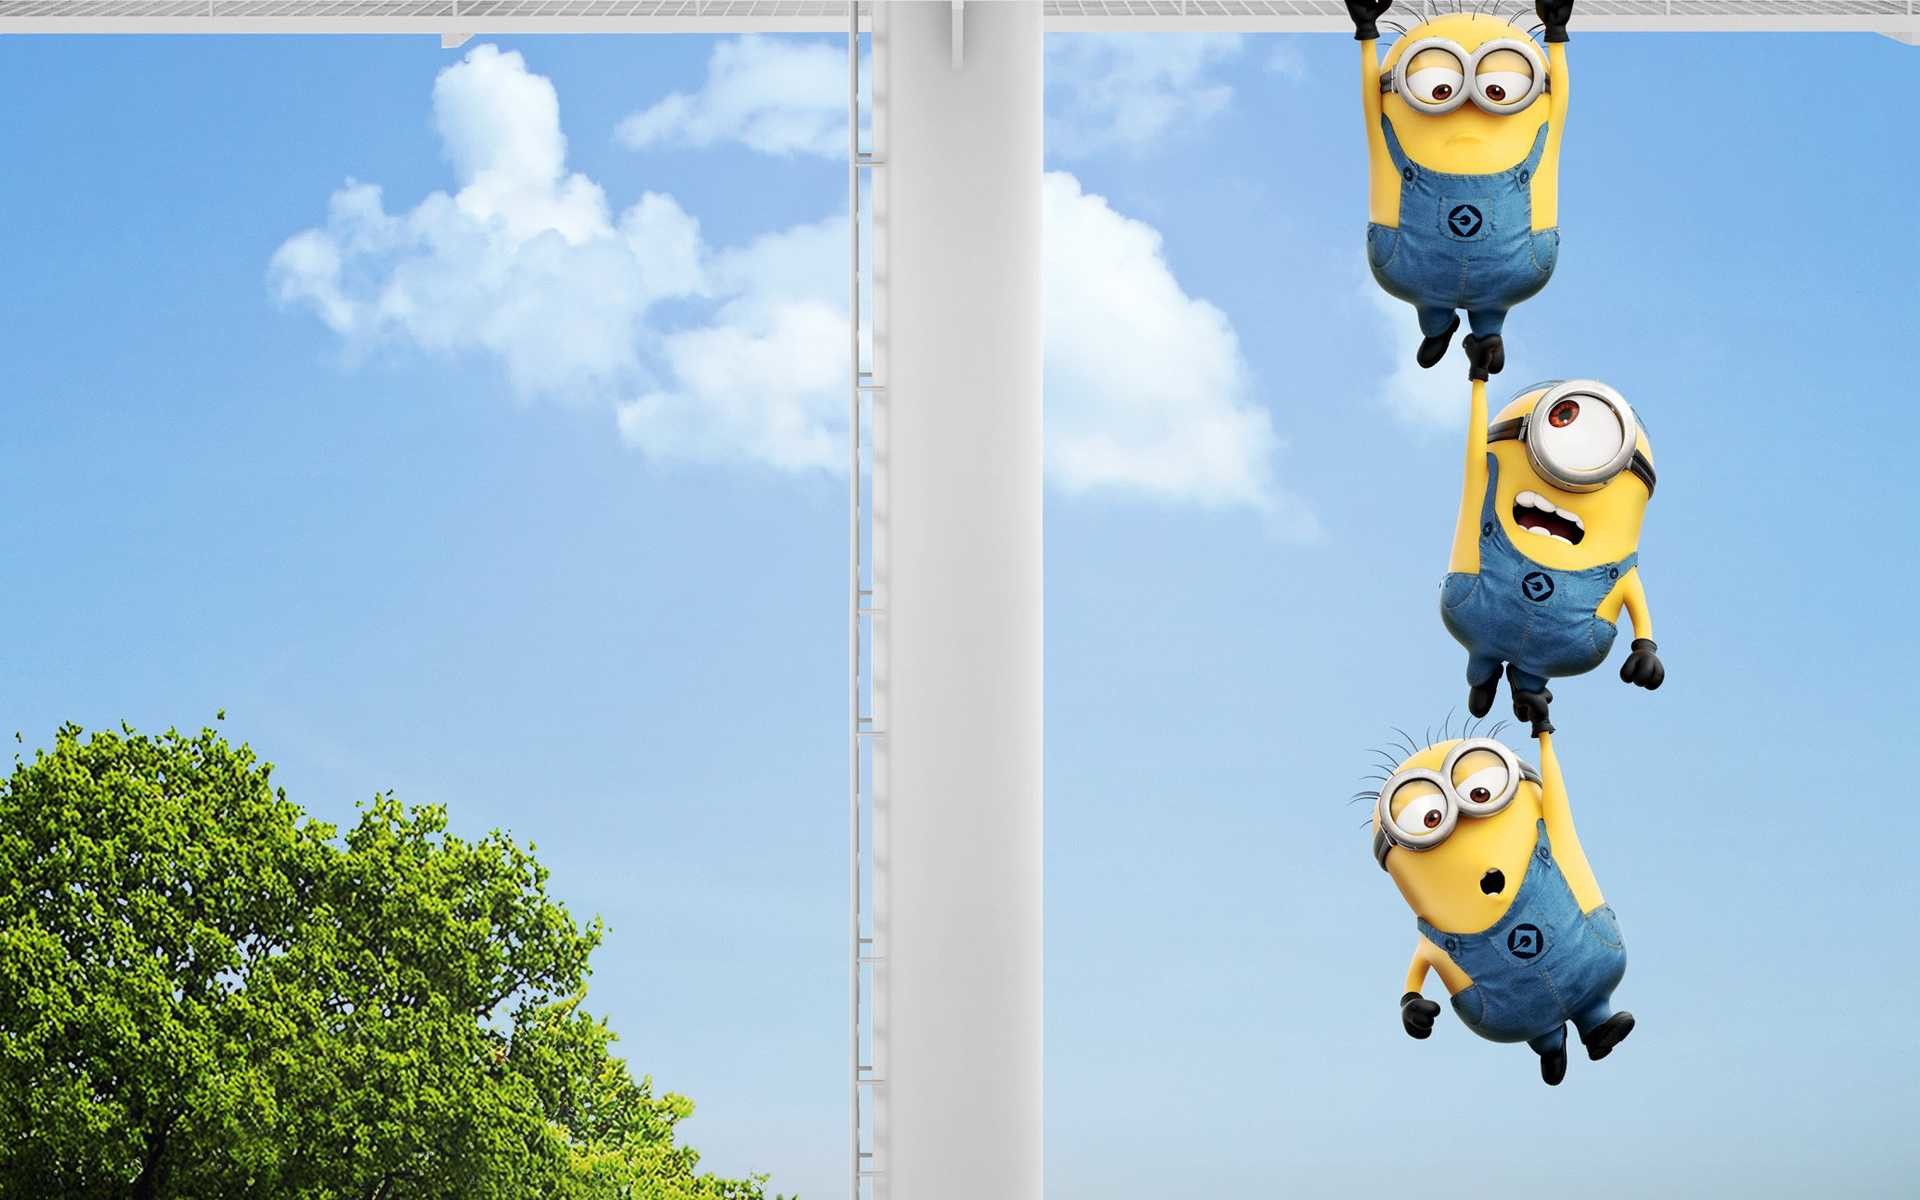 1920x1200 Despicable Me Minion Wallpapers Wallpaper | HD Wallpapers .